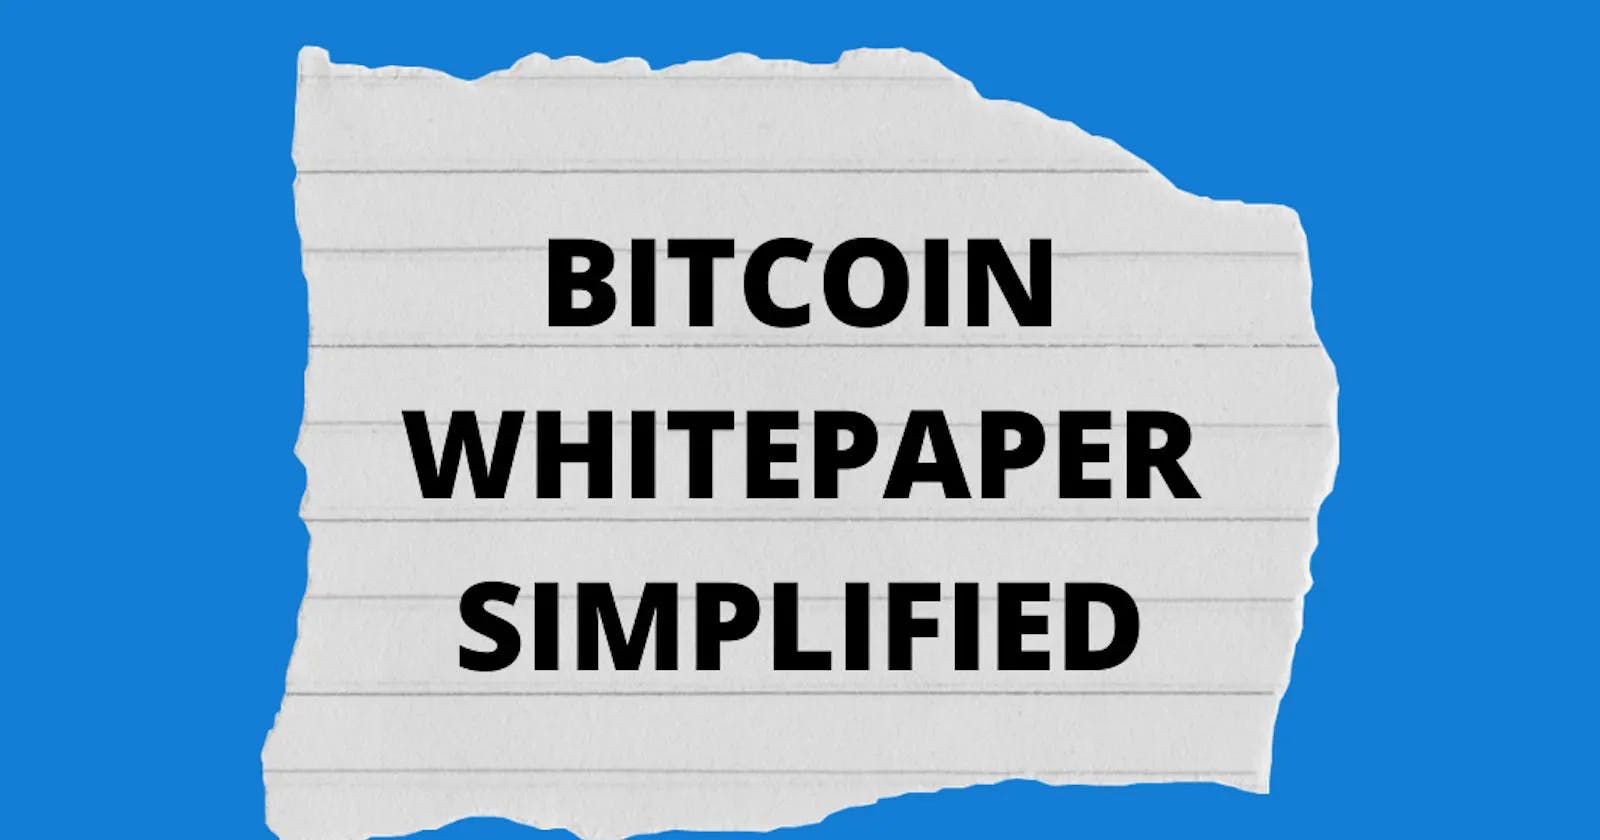 Bitcoin WhitePaper Simplified